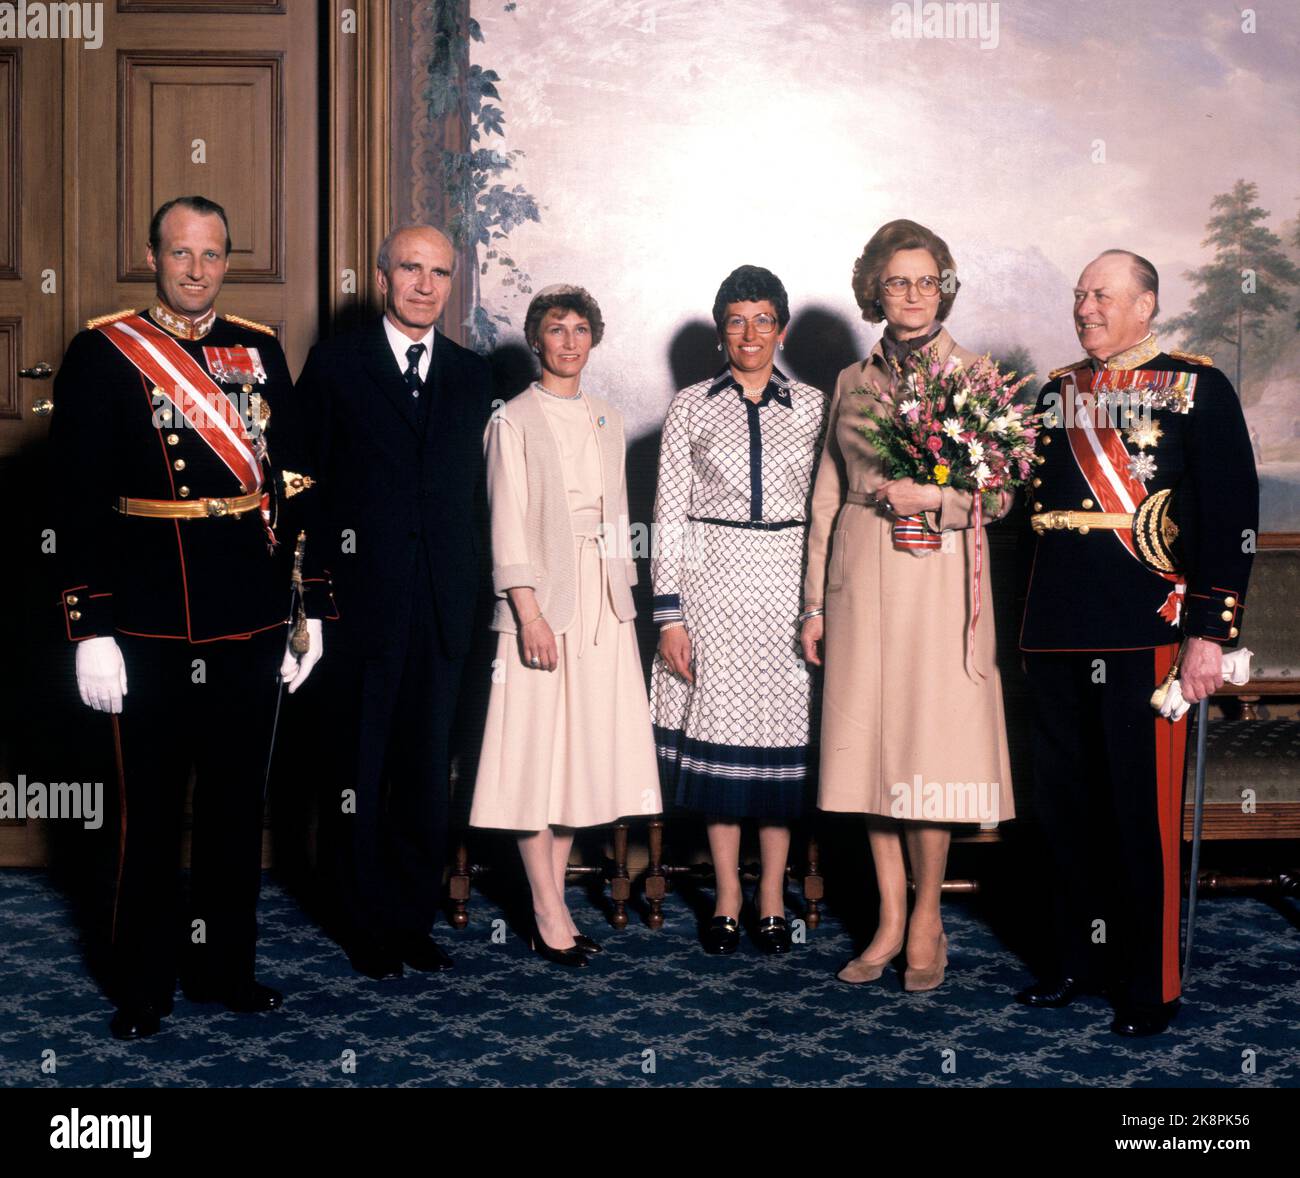 Oslo 19780420. Austrian President Rudolf Kirchschläger on an official visit to Norway. Here photographed in the birdworks at the castle. Eg. Crown Prince Harald, Rudolf Kirchschläger, Crown Princess Sonja, Princess Astrid, Mrs. Kirchschläger and King Olav. Photo: Bjørn Sigurdsøn NTB / NTB Stock Photo